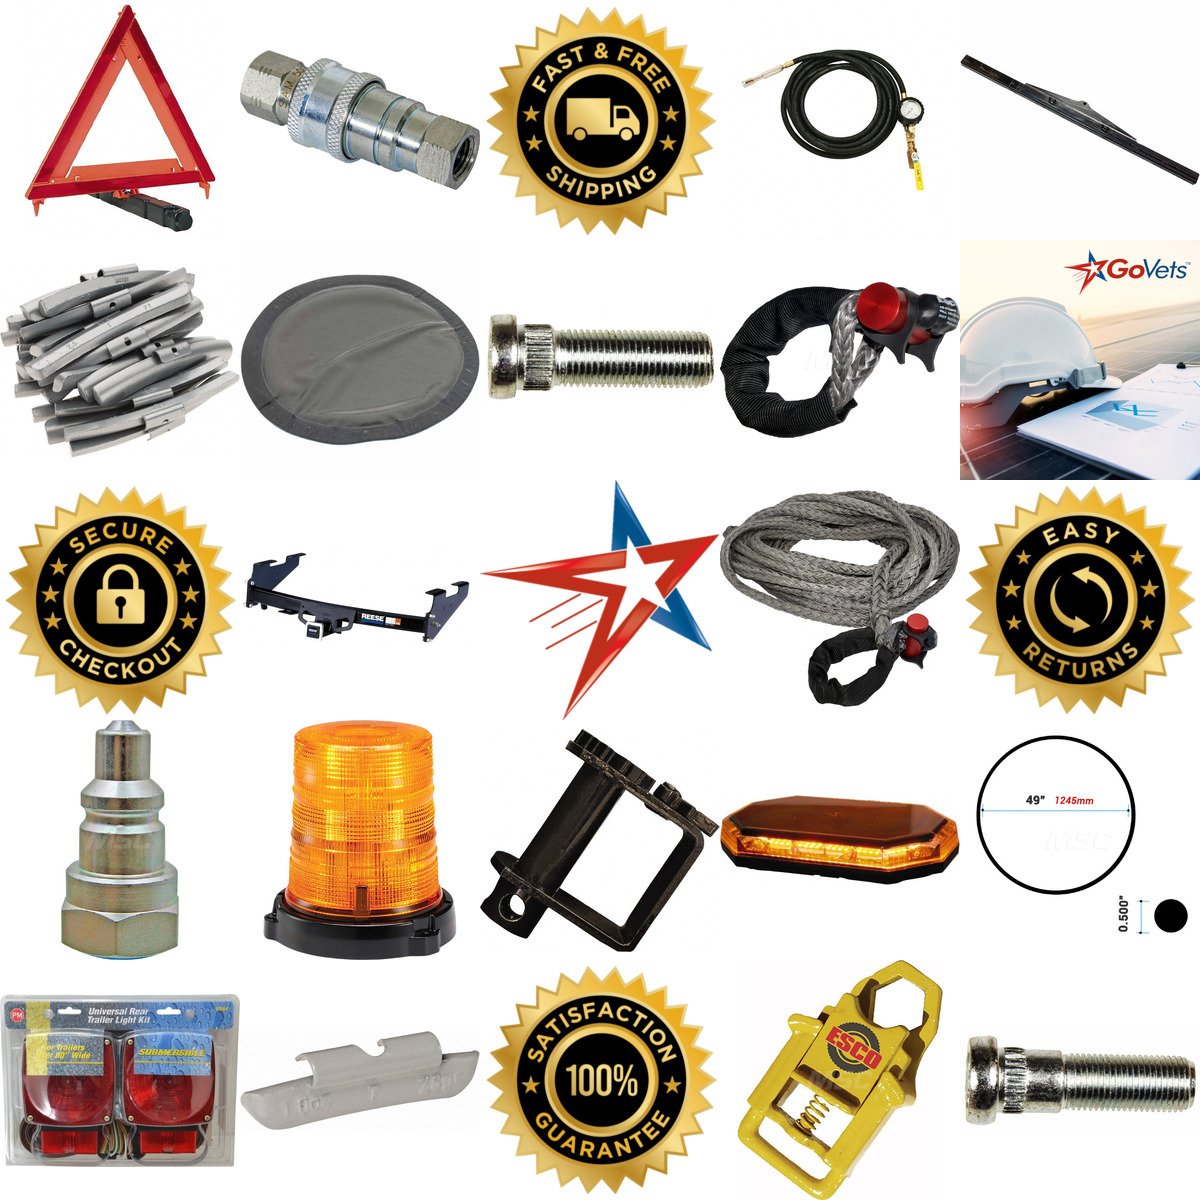 A selection of Tire Wheel and Towing Equipment products on GoVets